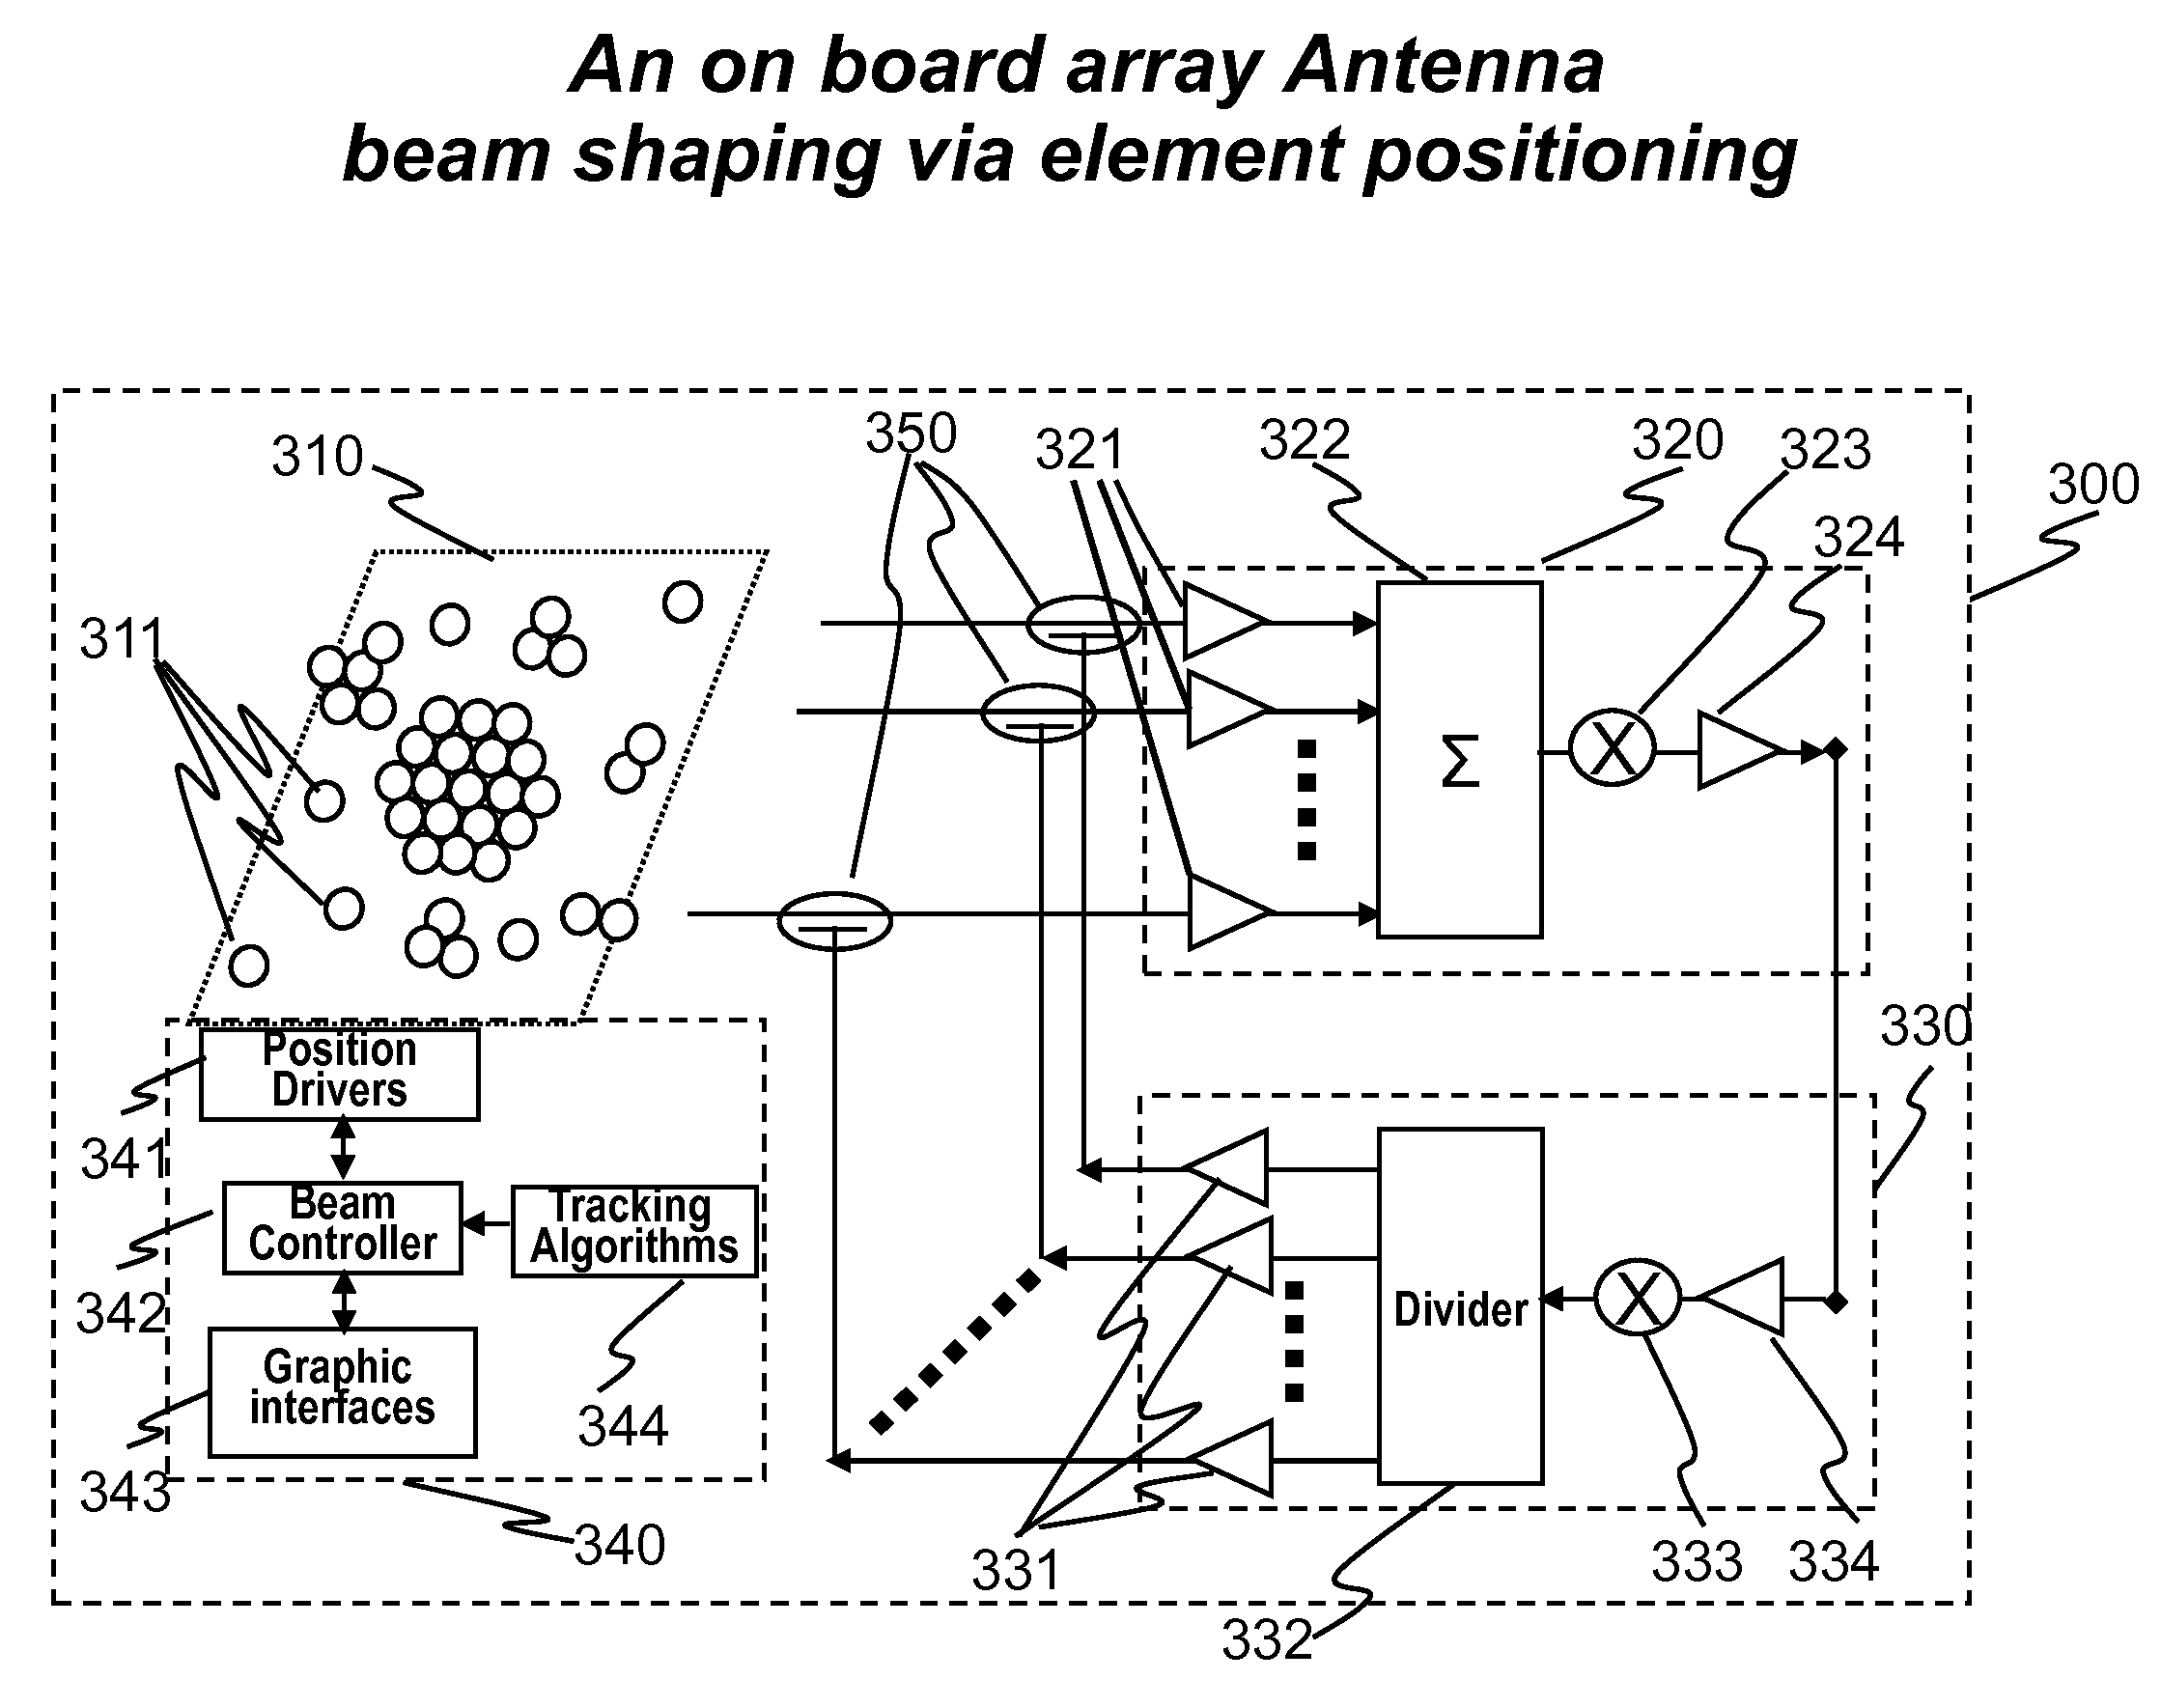 Architectures and Methods for Novel Antenna Radiation Optimization via Feed Repositioning